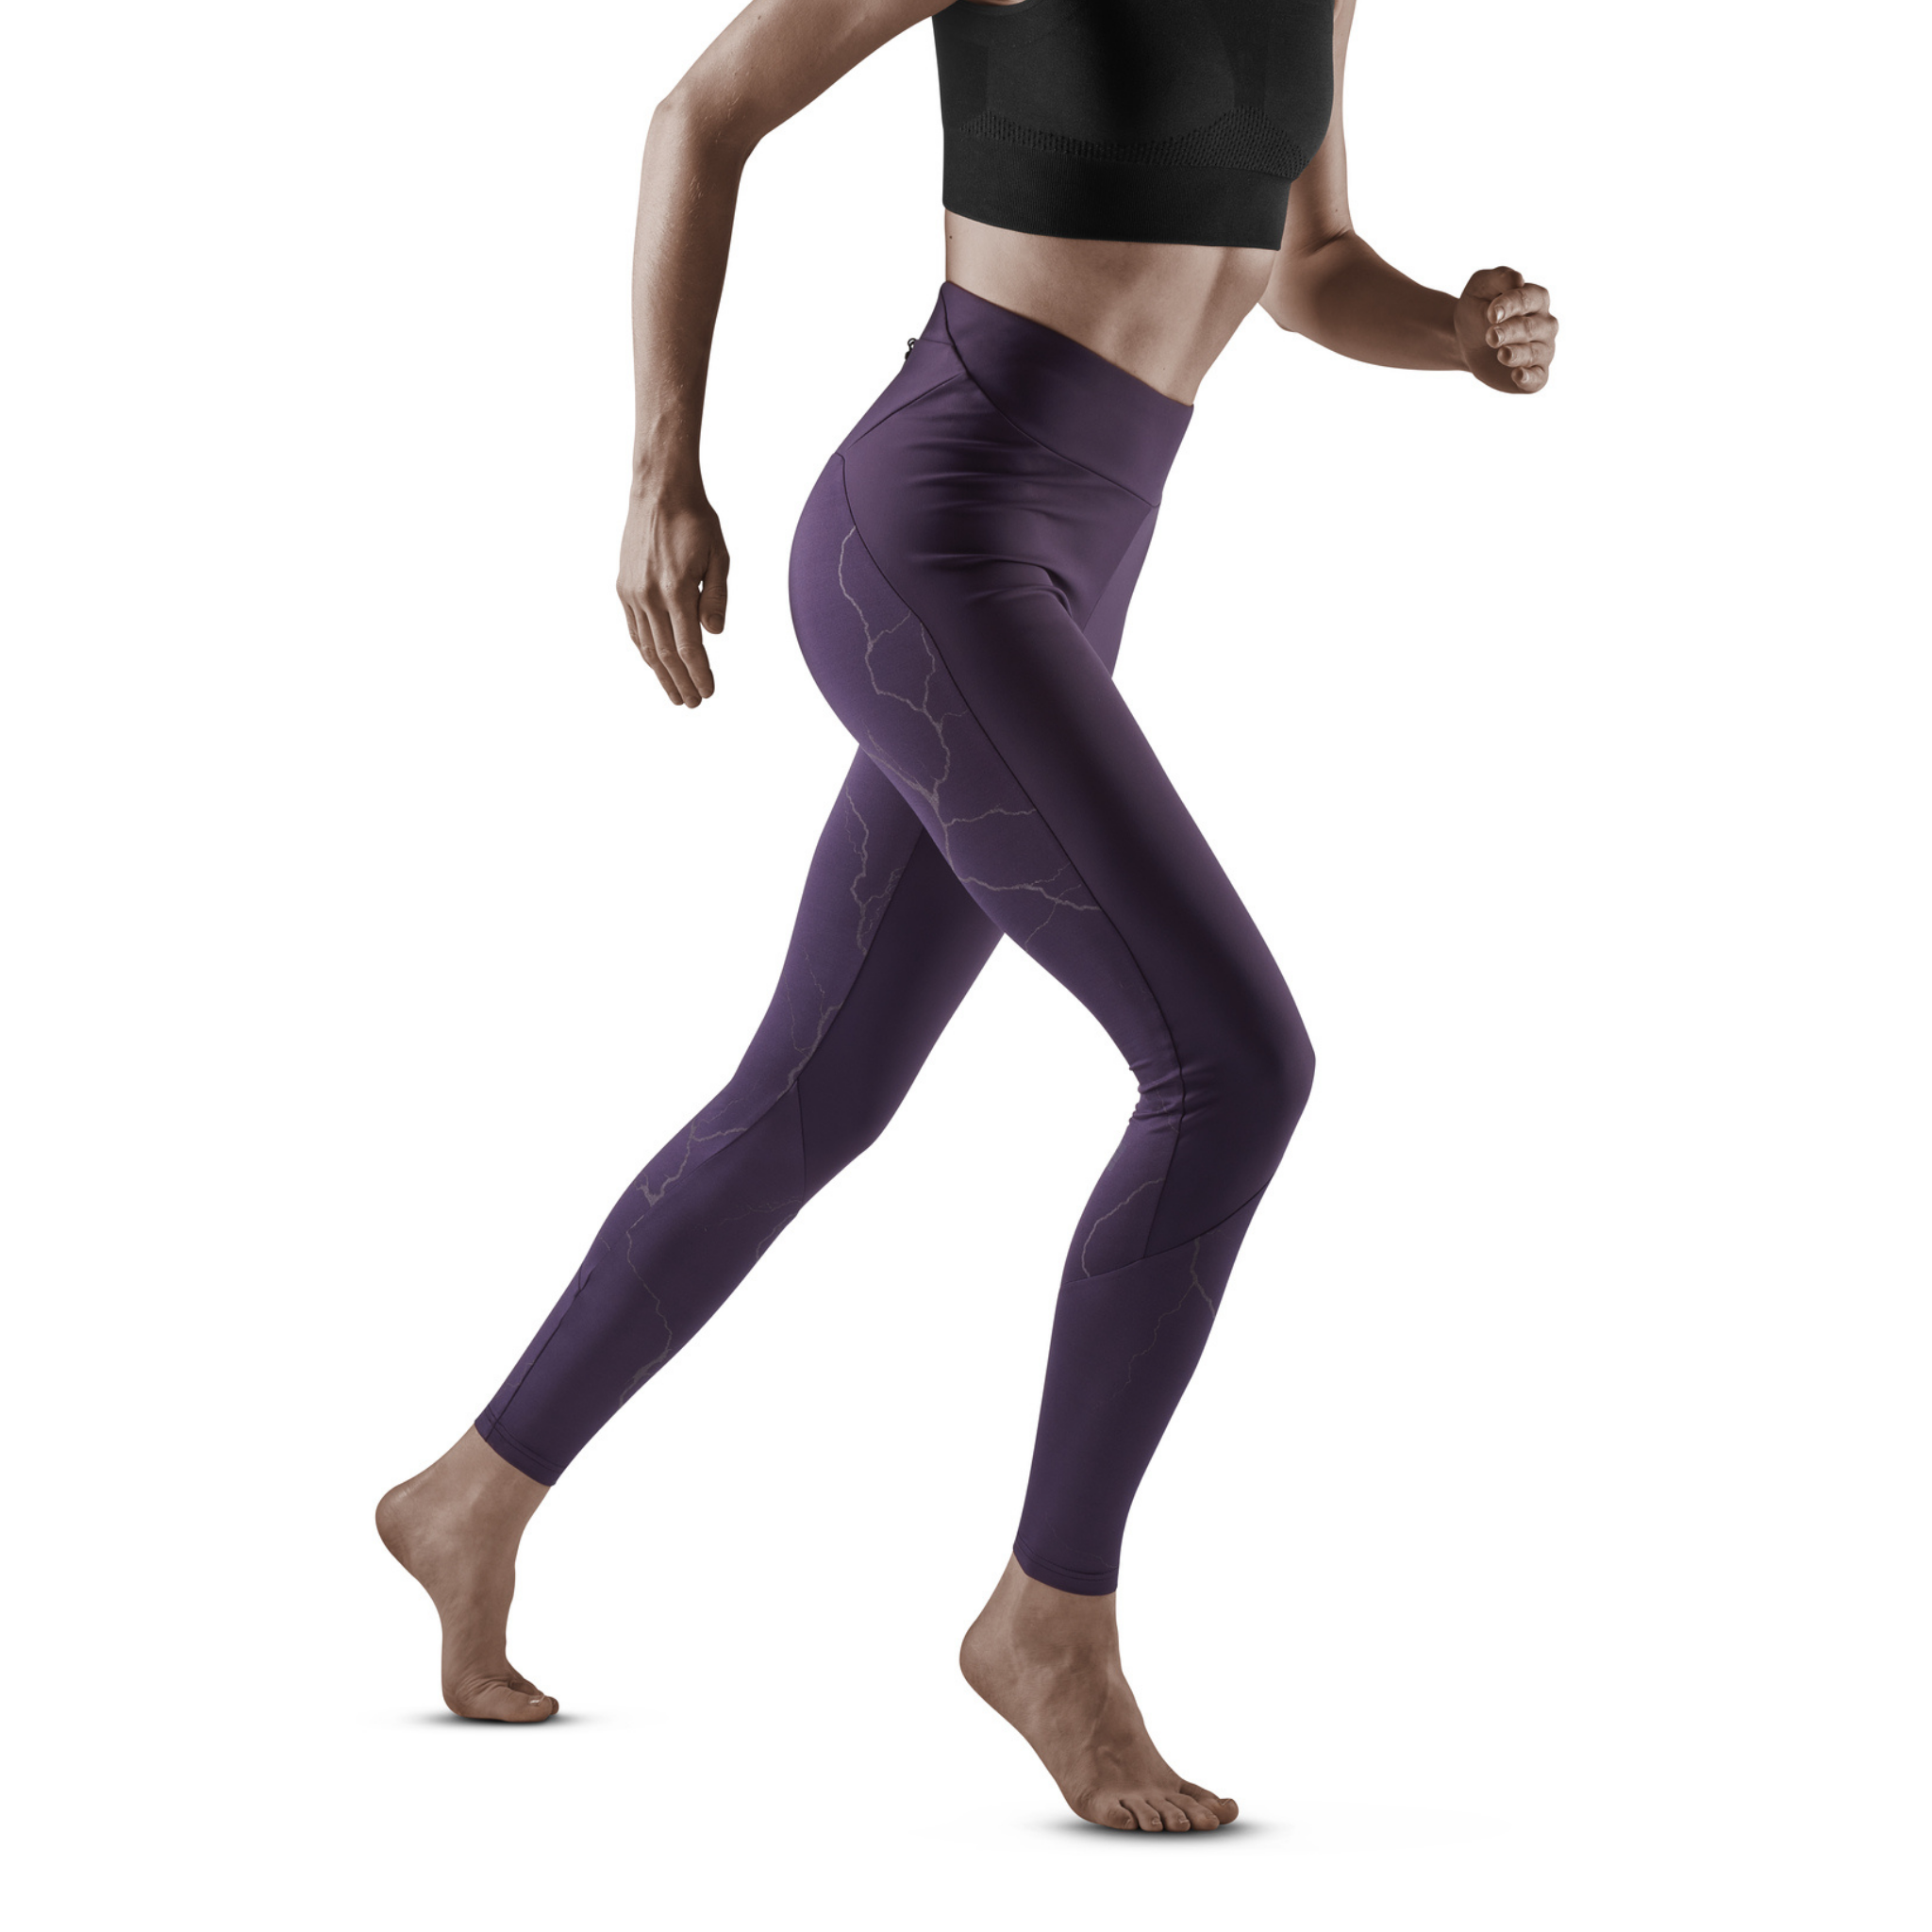 CEP Reflective Tights, Women